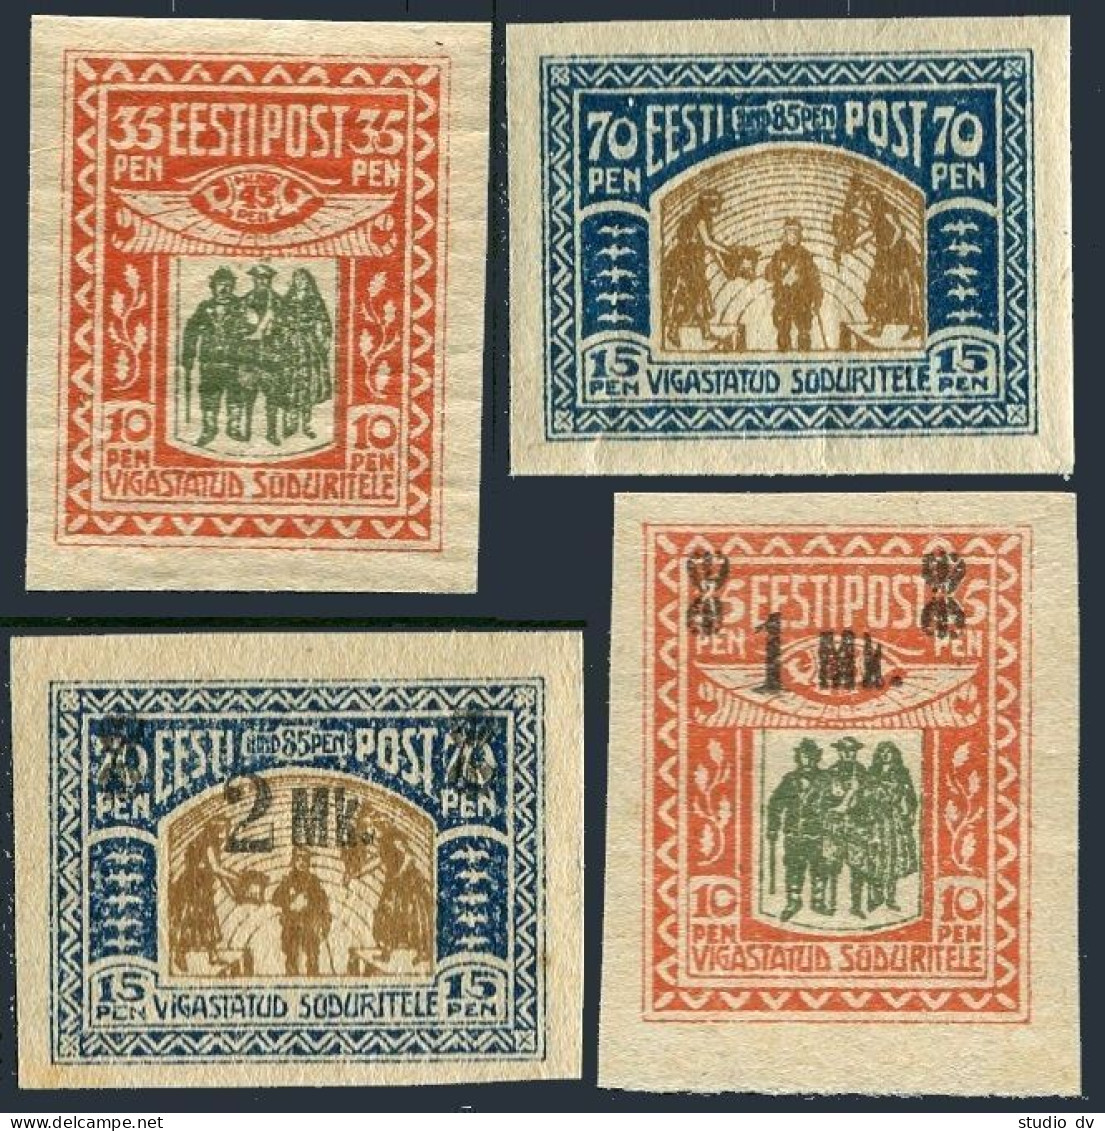 Estonia B1-B4, Mint No Gum. Assisting Wounded Soldier, Aid & Surcharged, 1920. - Estonia